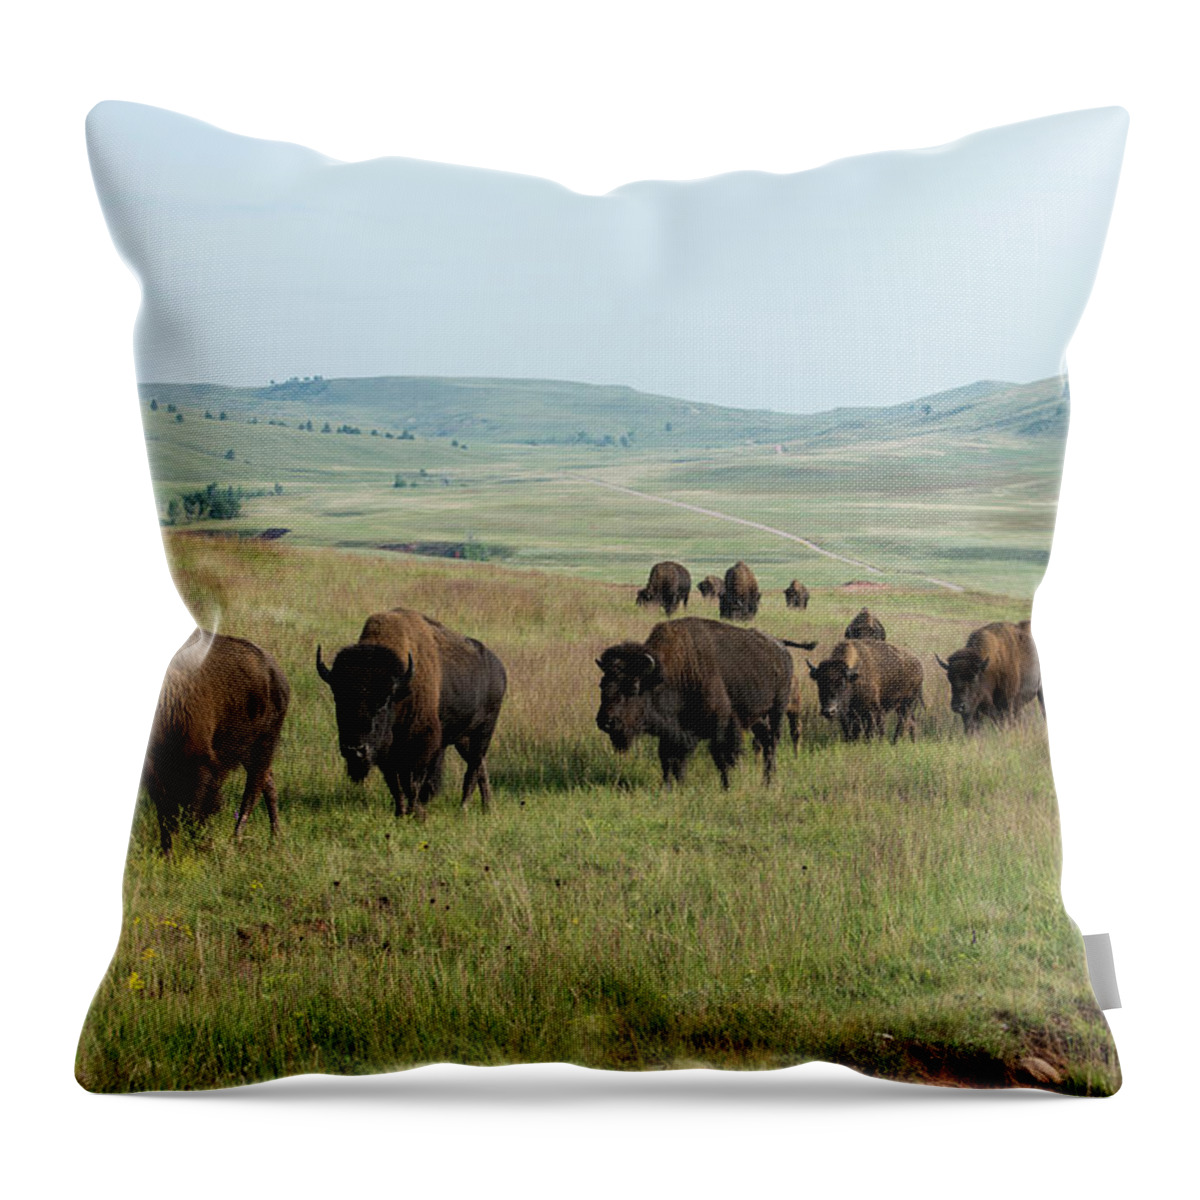 Grass Throw Pillow featuring the photograph Bison Buffalo In Wind Cave National Park #3 by Mark Newman